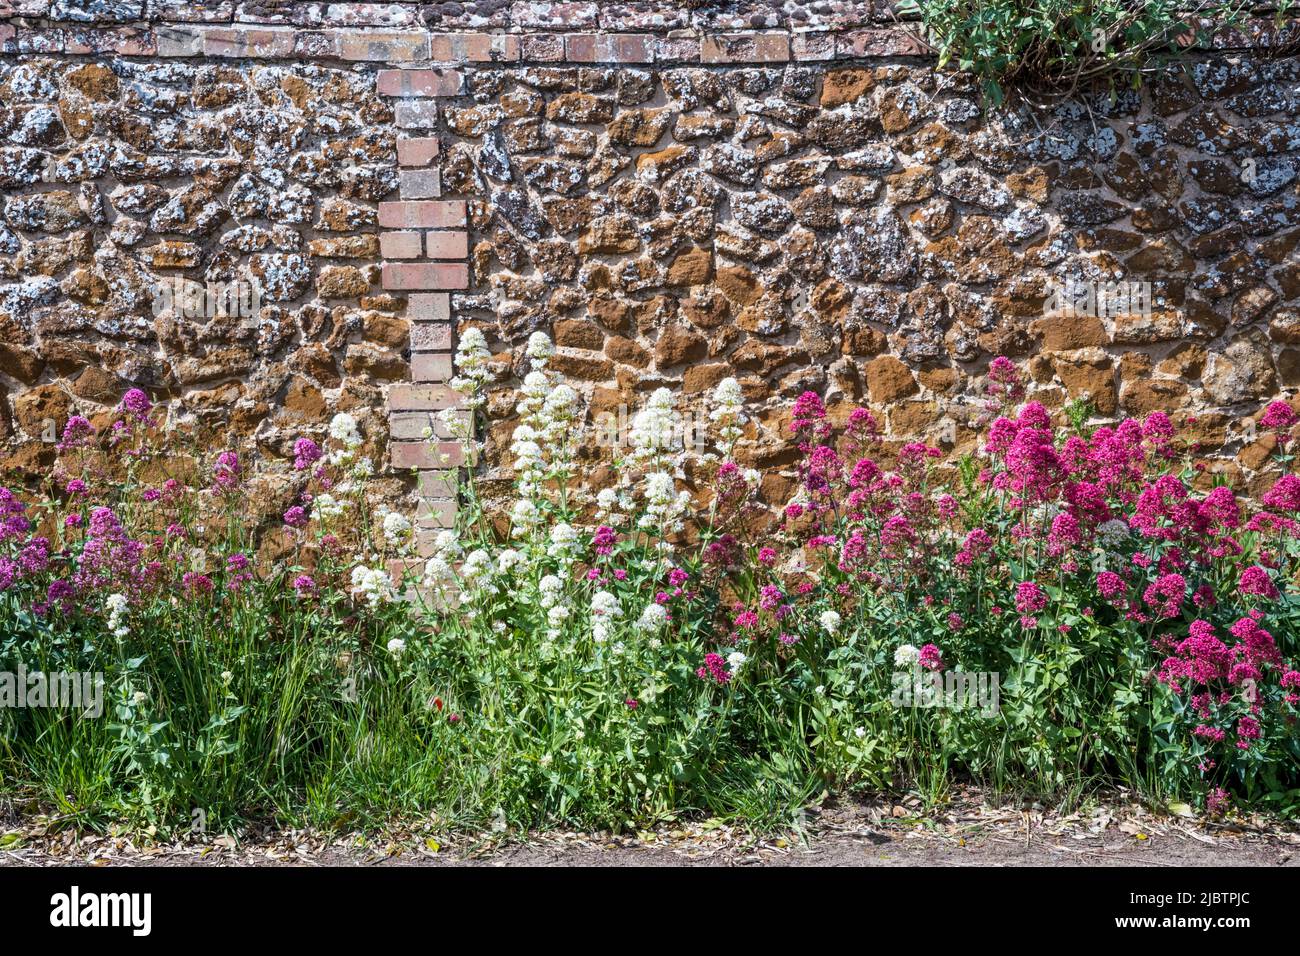 Red valerian, Centranthus ruber, & white valerian, Centranthus ruber Albus, growing at the base of a predominantly carstone wall in Norfolk. Stock Photo